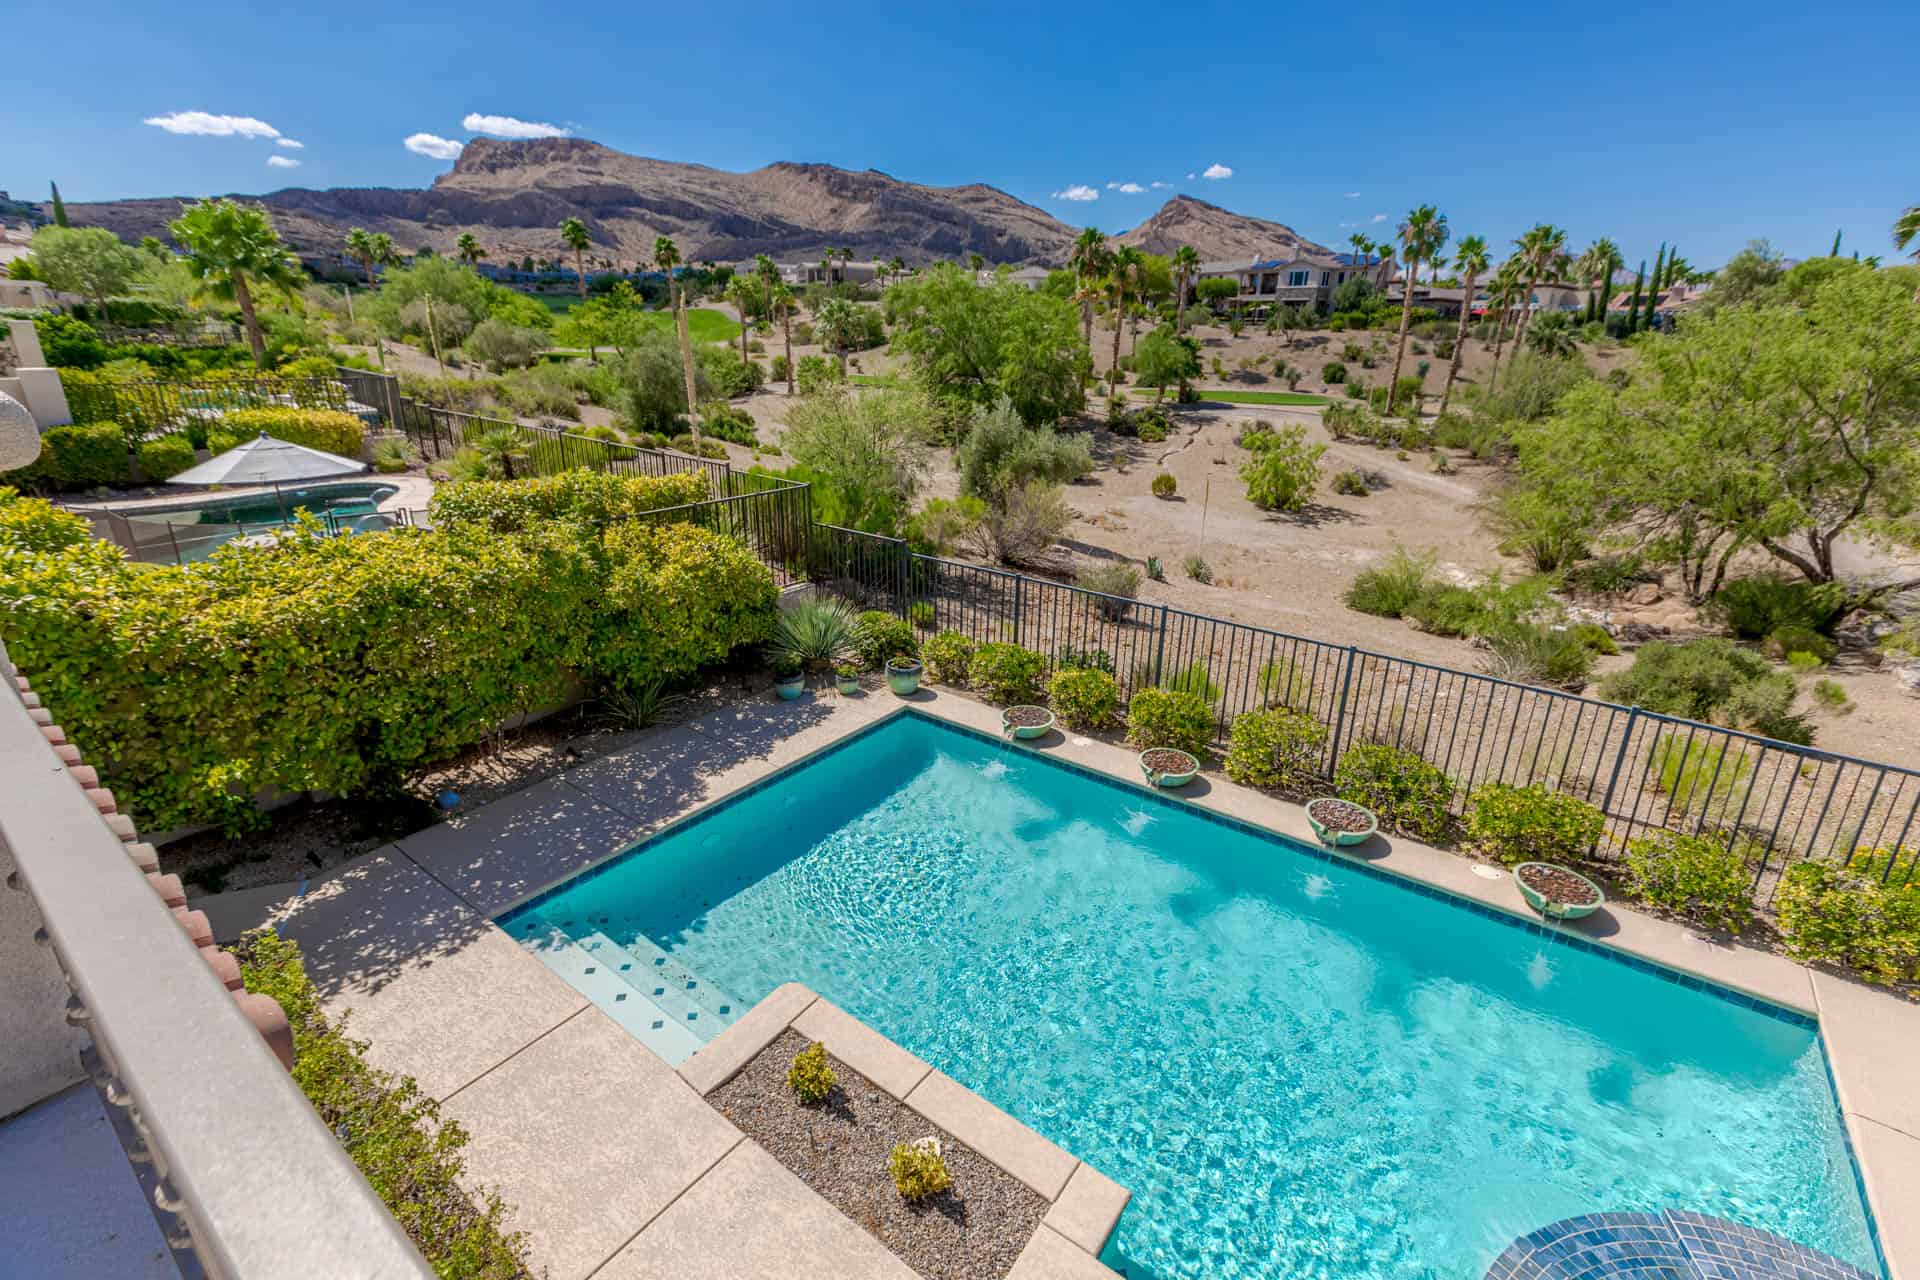 las-vegas-luxry-real-estate-realtor-rob-jensen-company-11434-glowing-sunset-lane-red-rock-country-club55